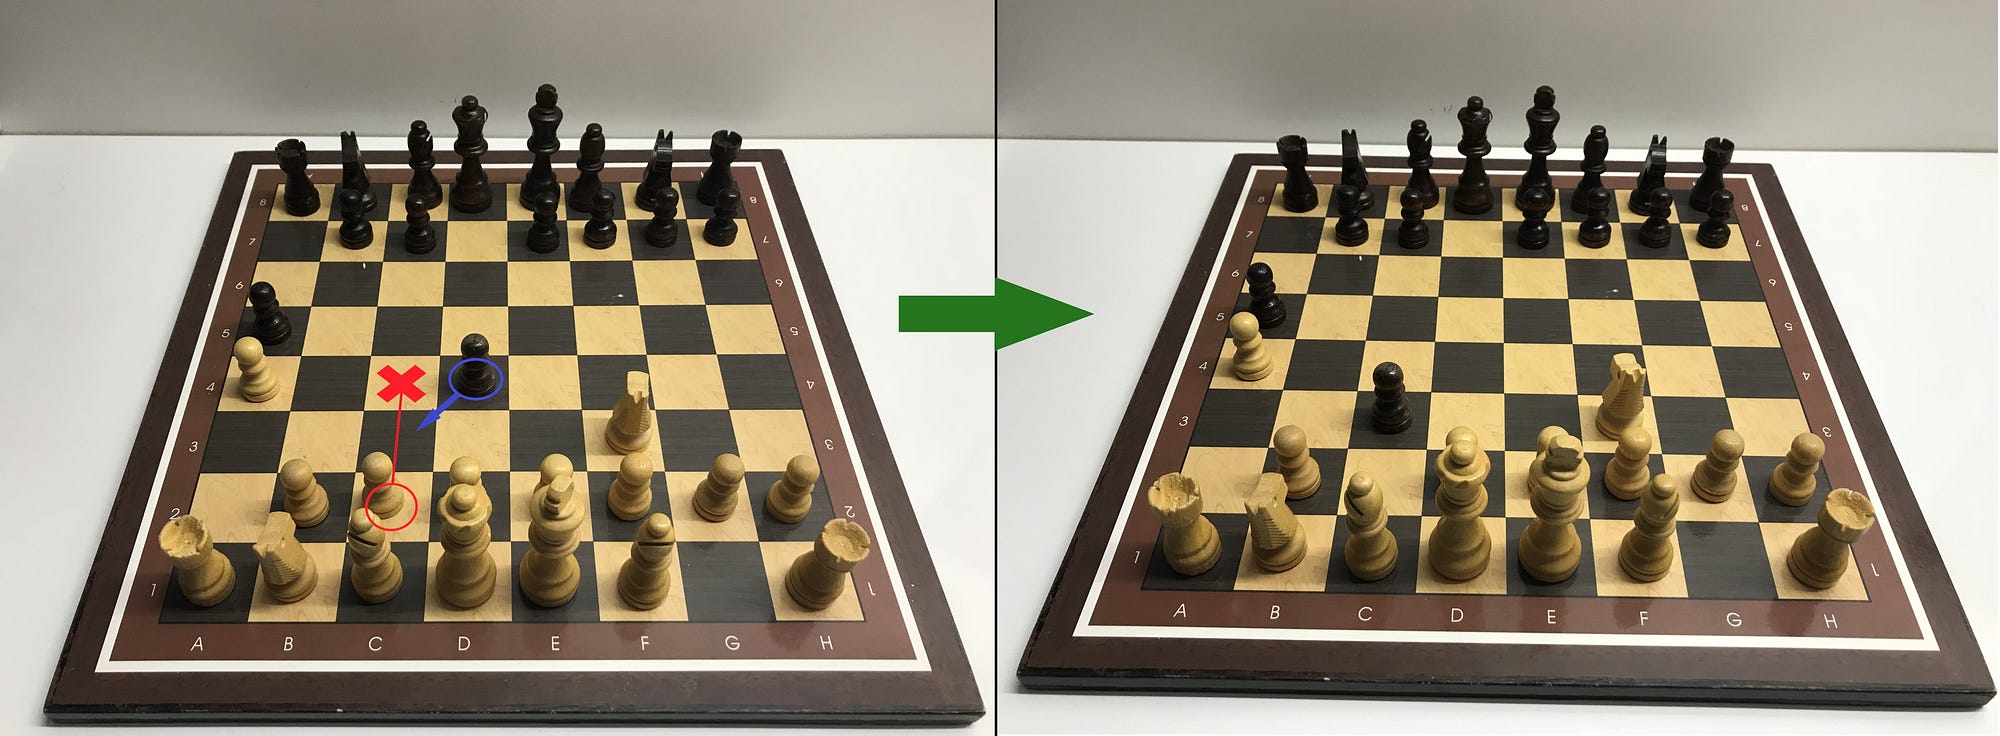 Forcing the King to run with the Double Check, Chess Tactics